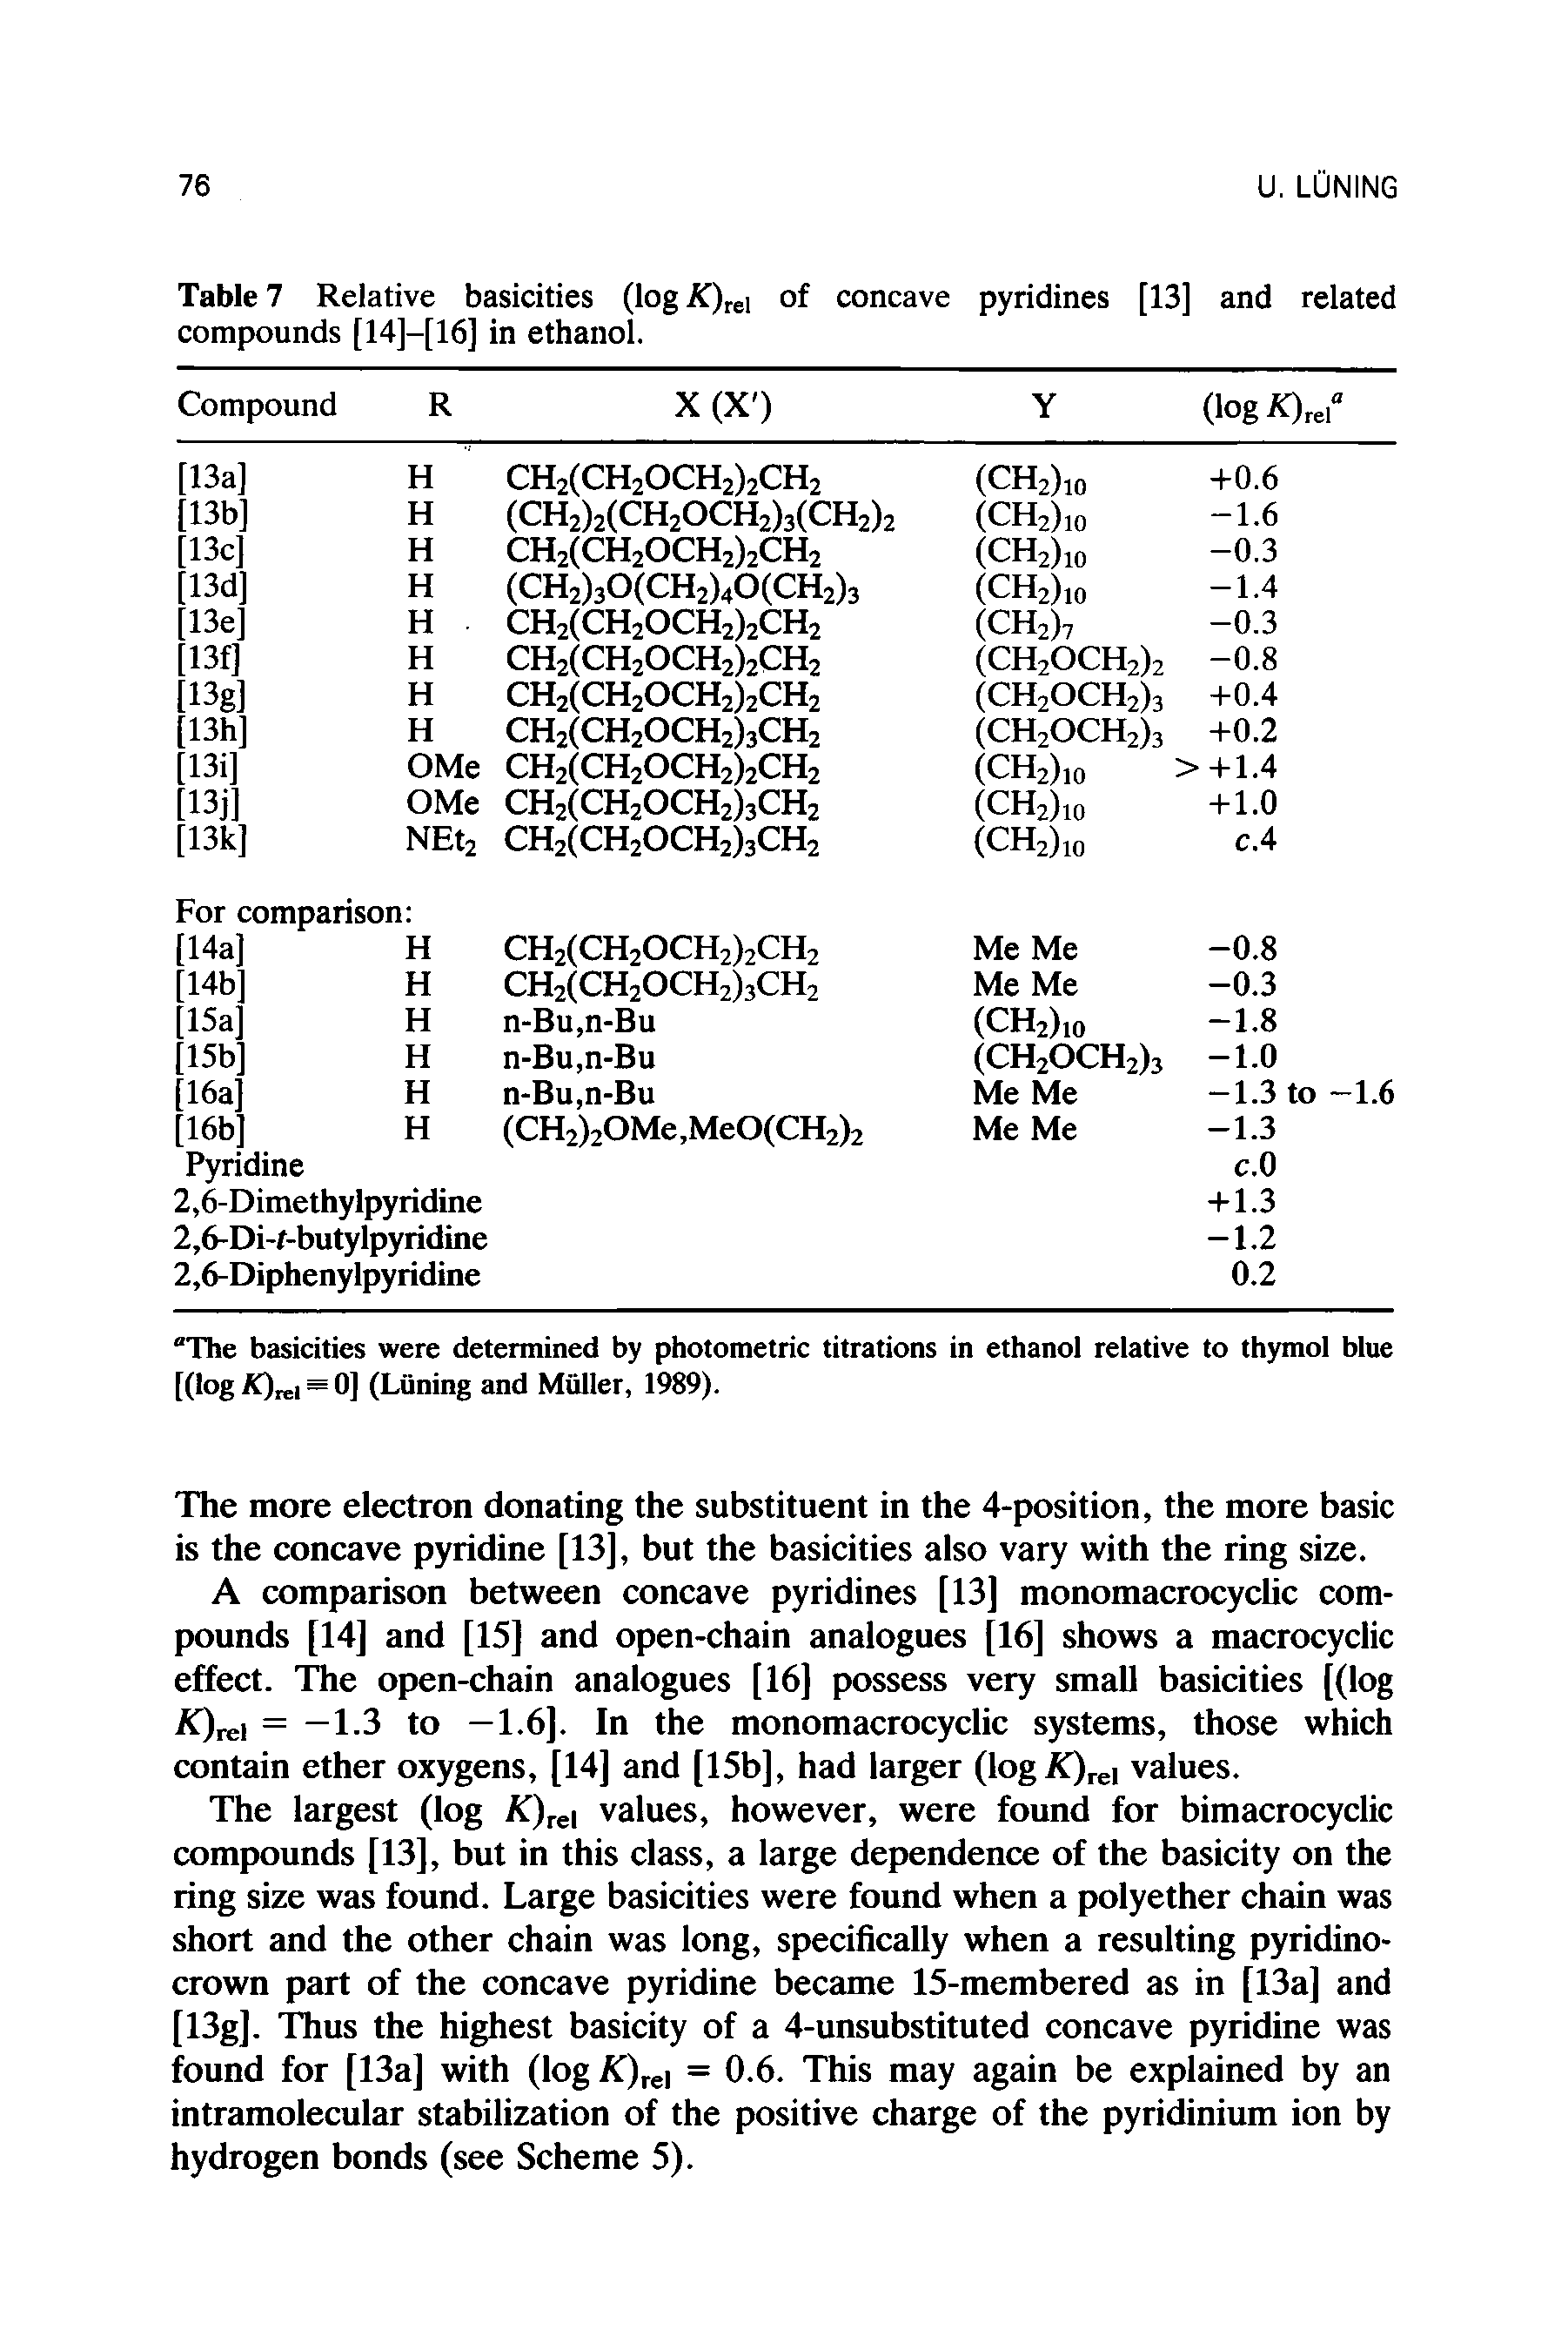 Table Relative basicities (log ) of concave pyridines [13] and related compounds [14]-[16] in ethanol.